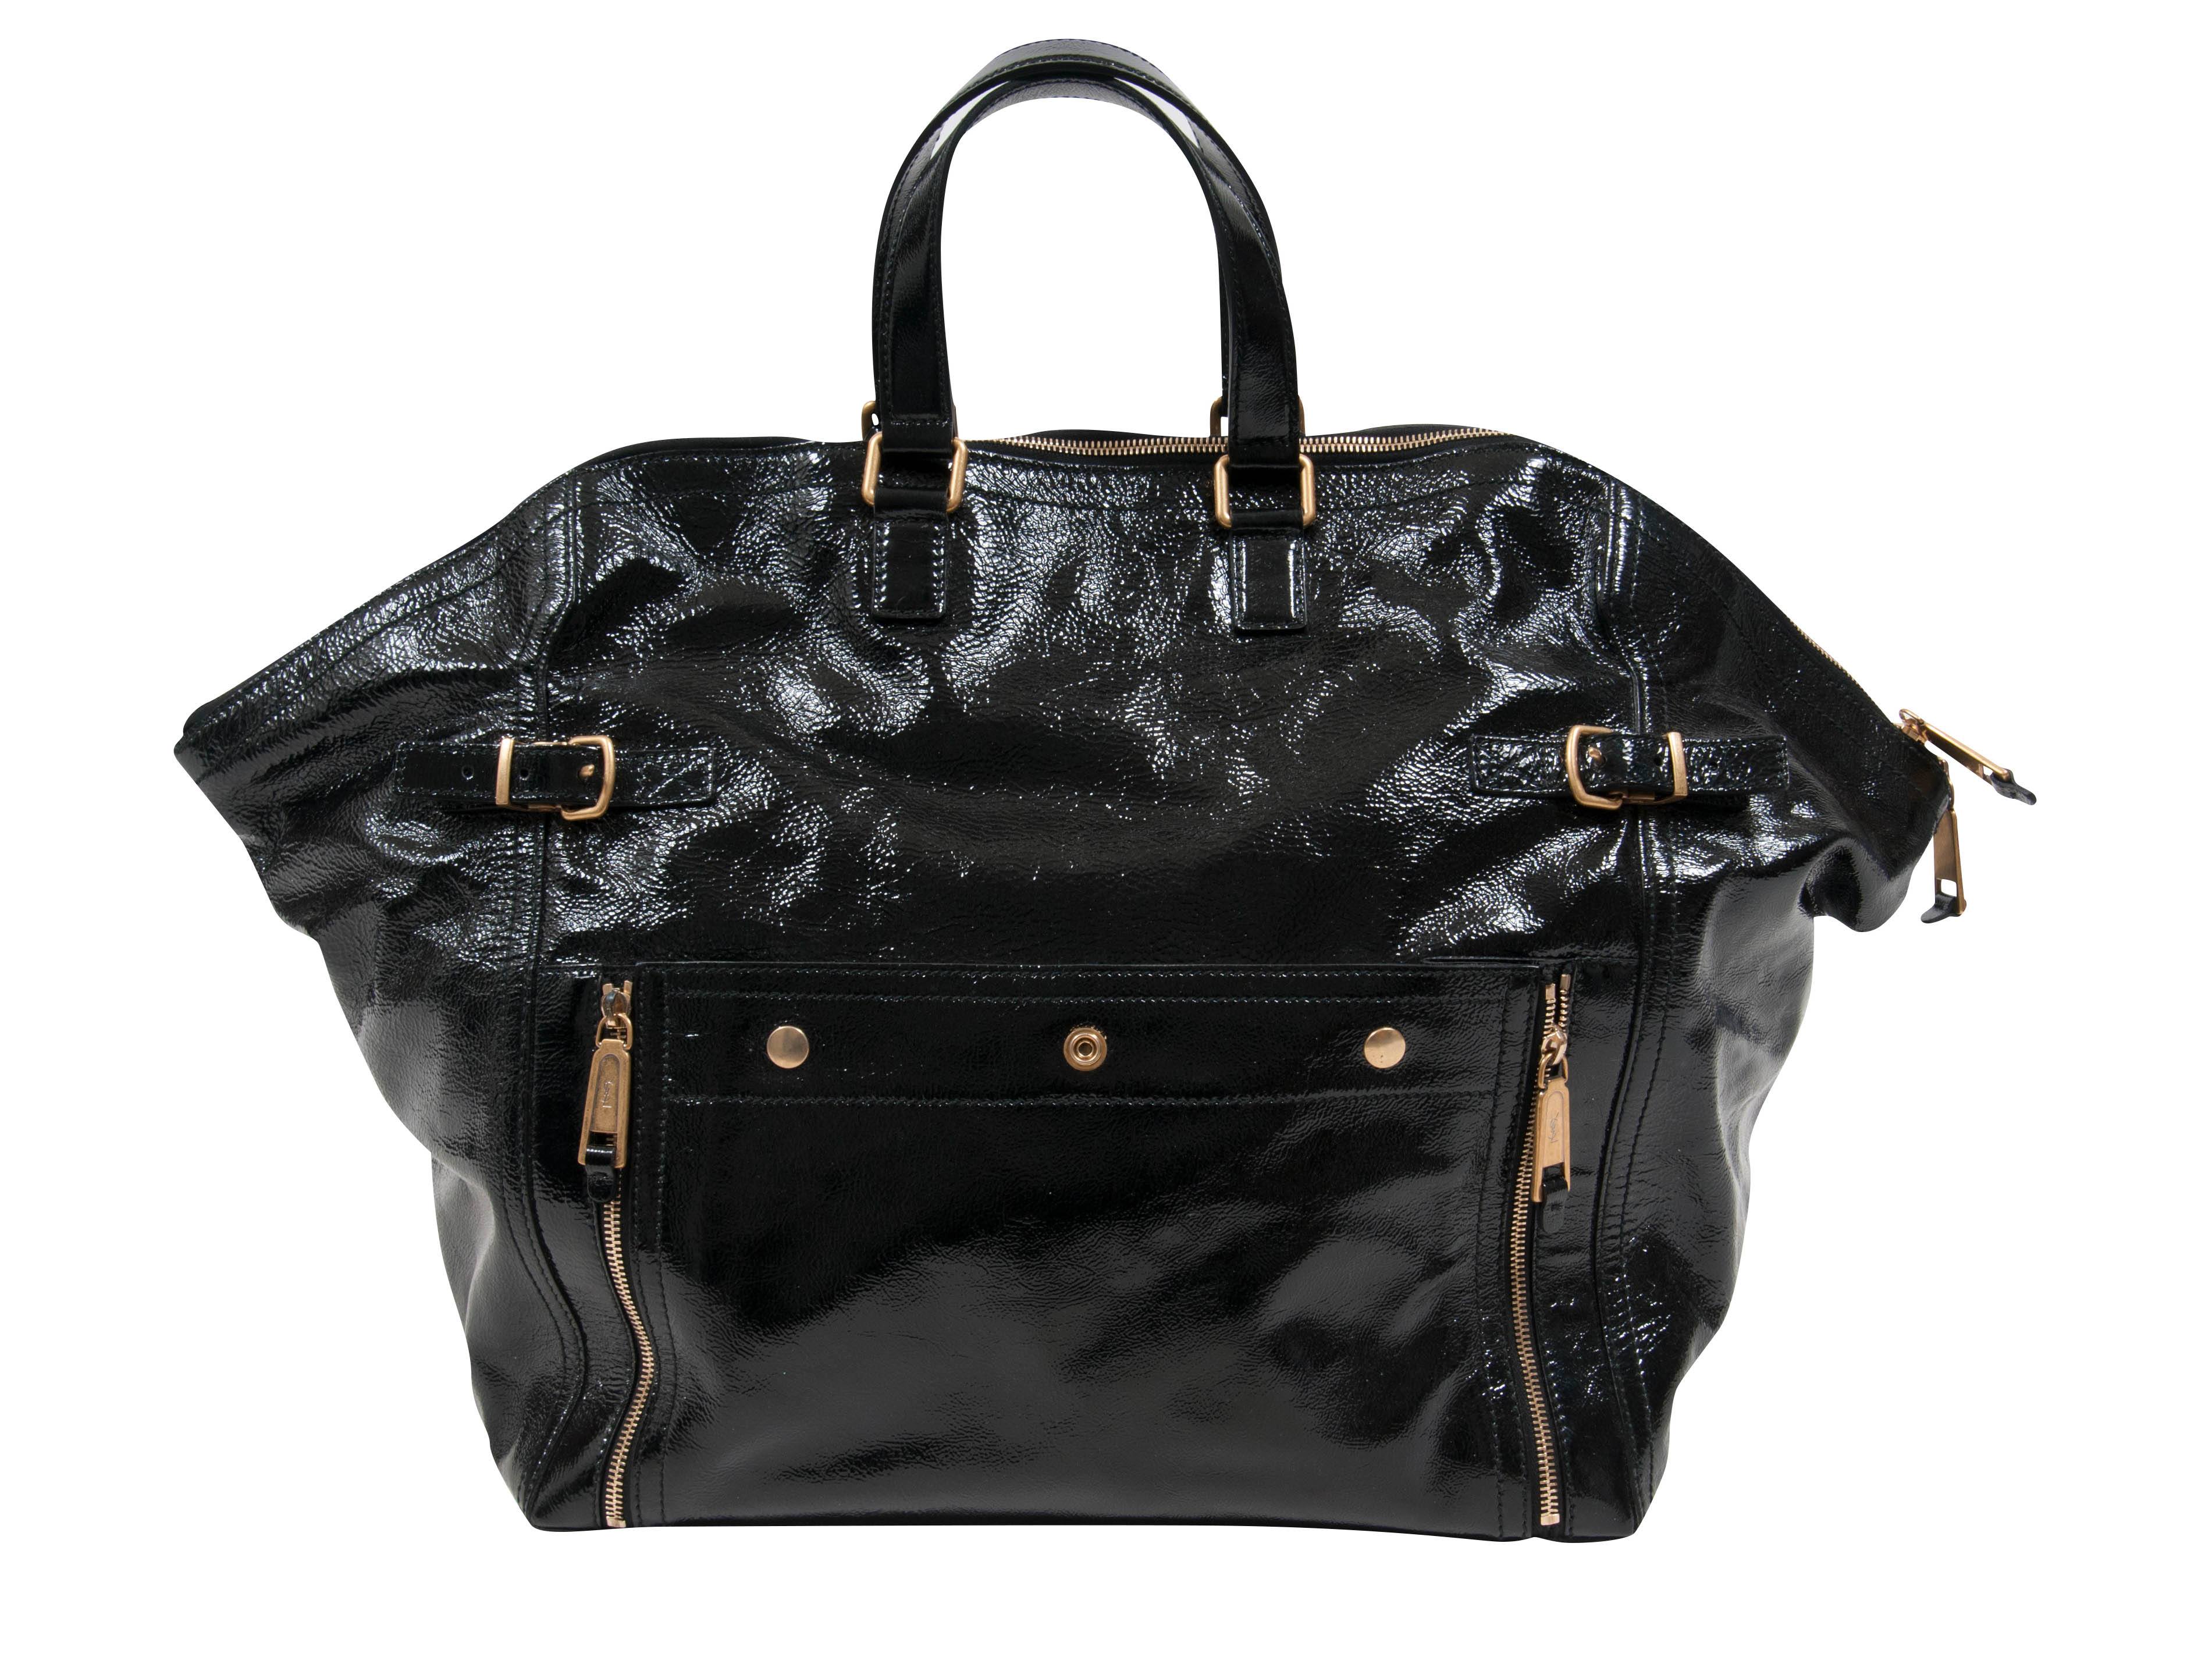 Yves Saint Laurent, Black Patent Leather Downtown Tote Bag